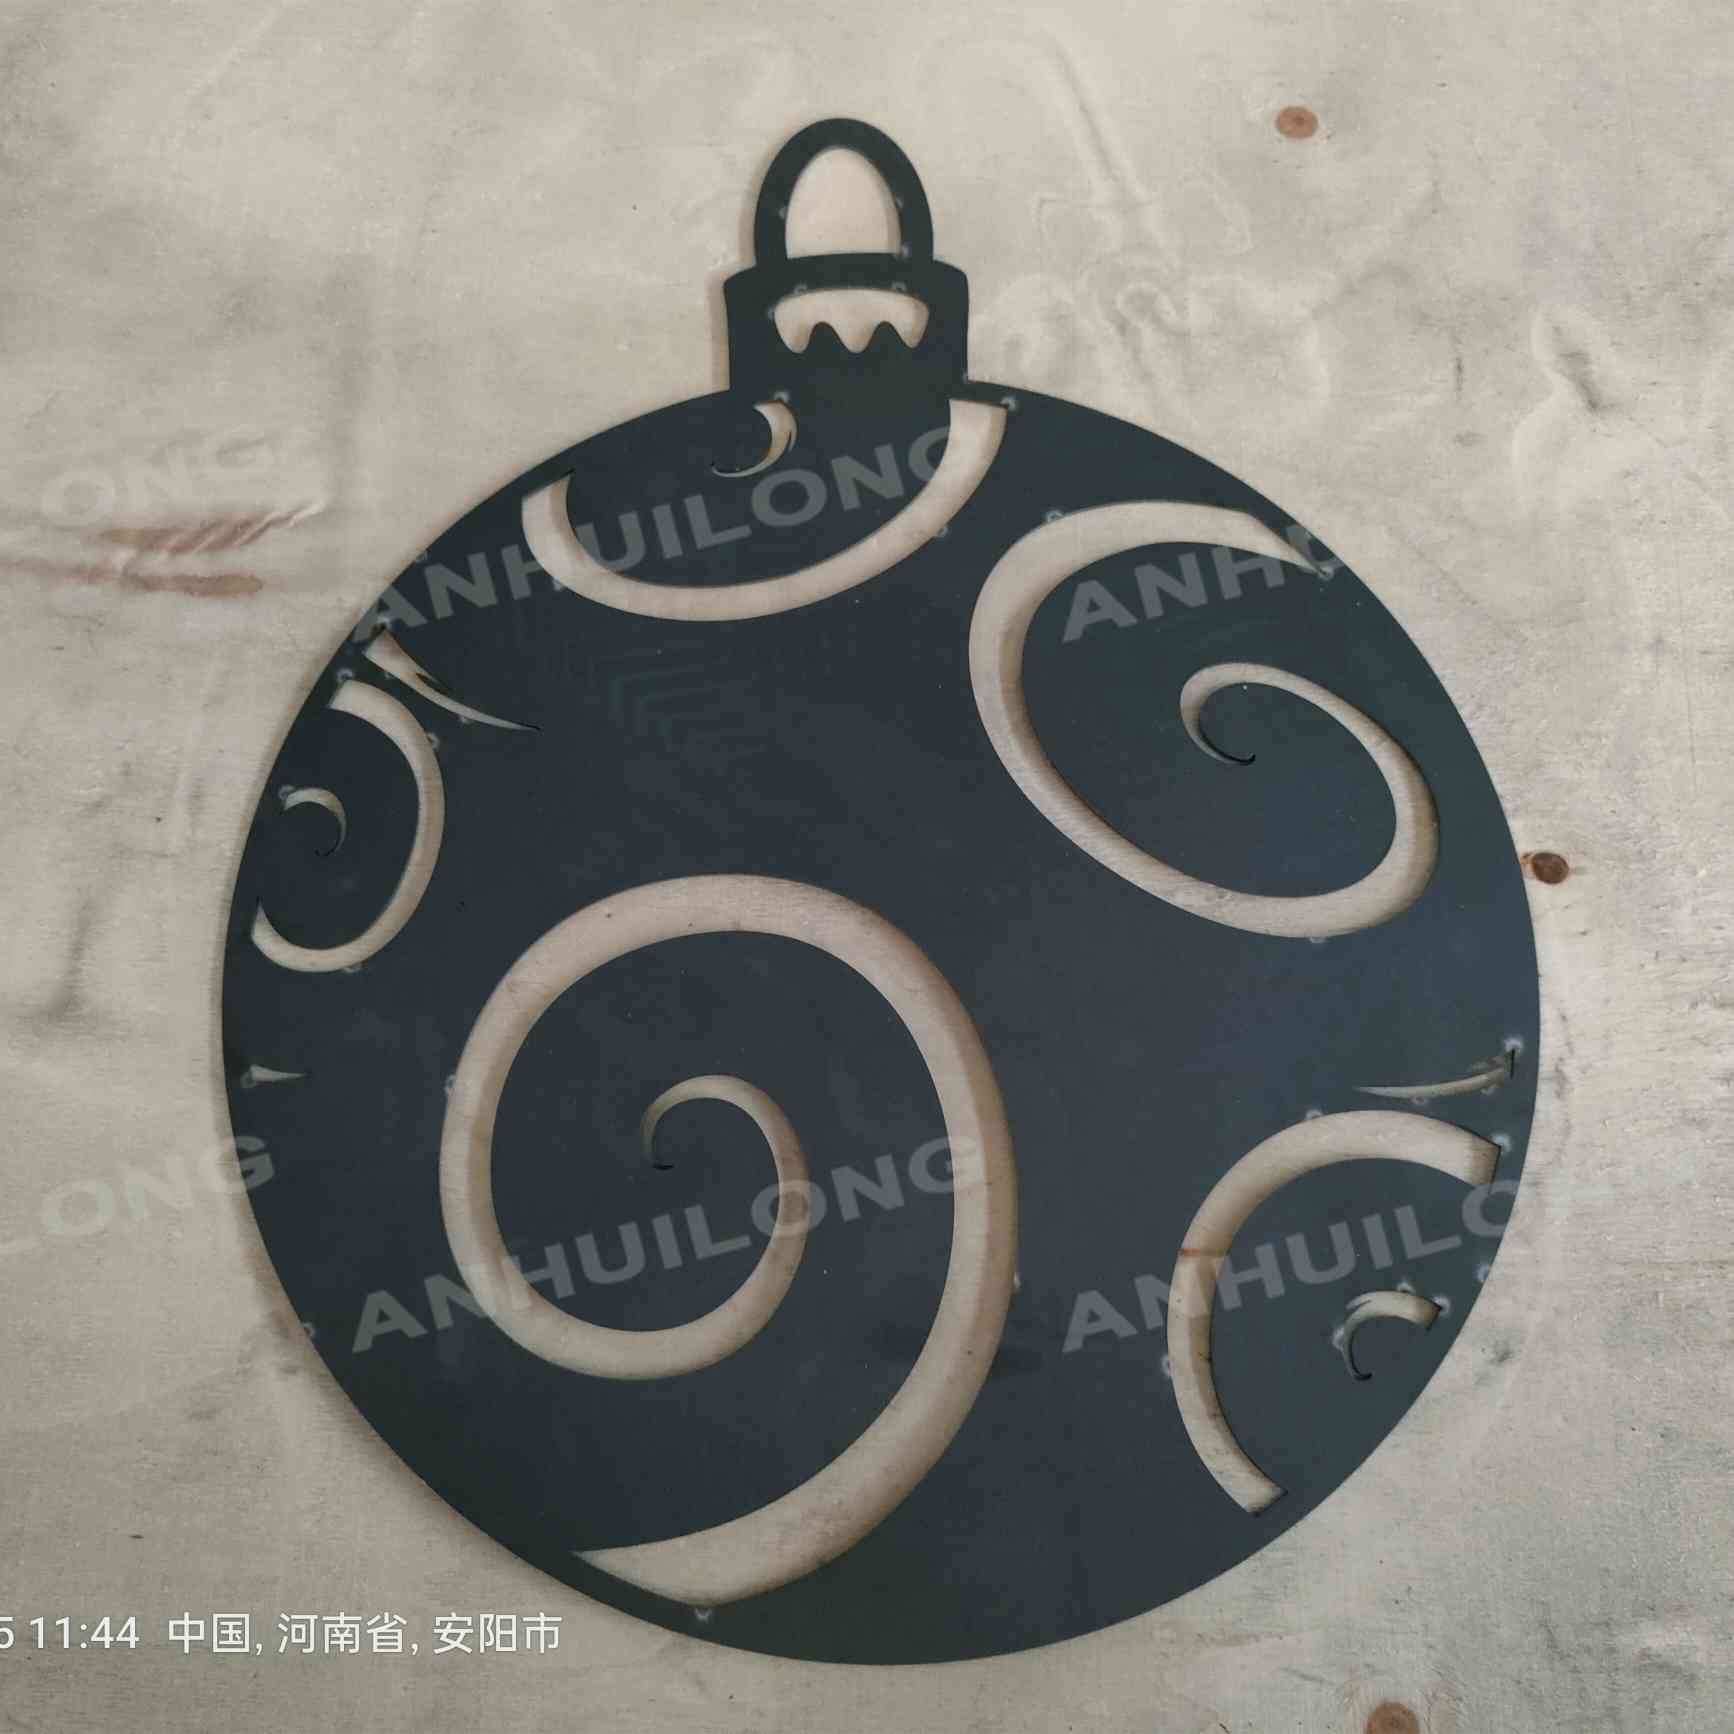 Customized tabletop decor for metal art